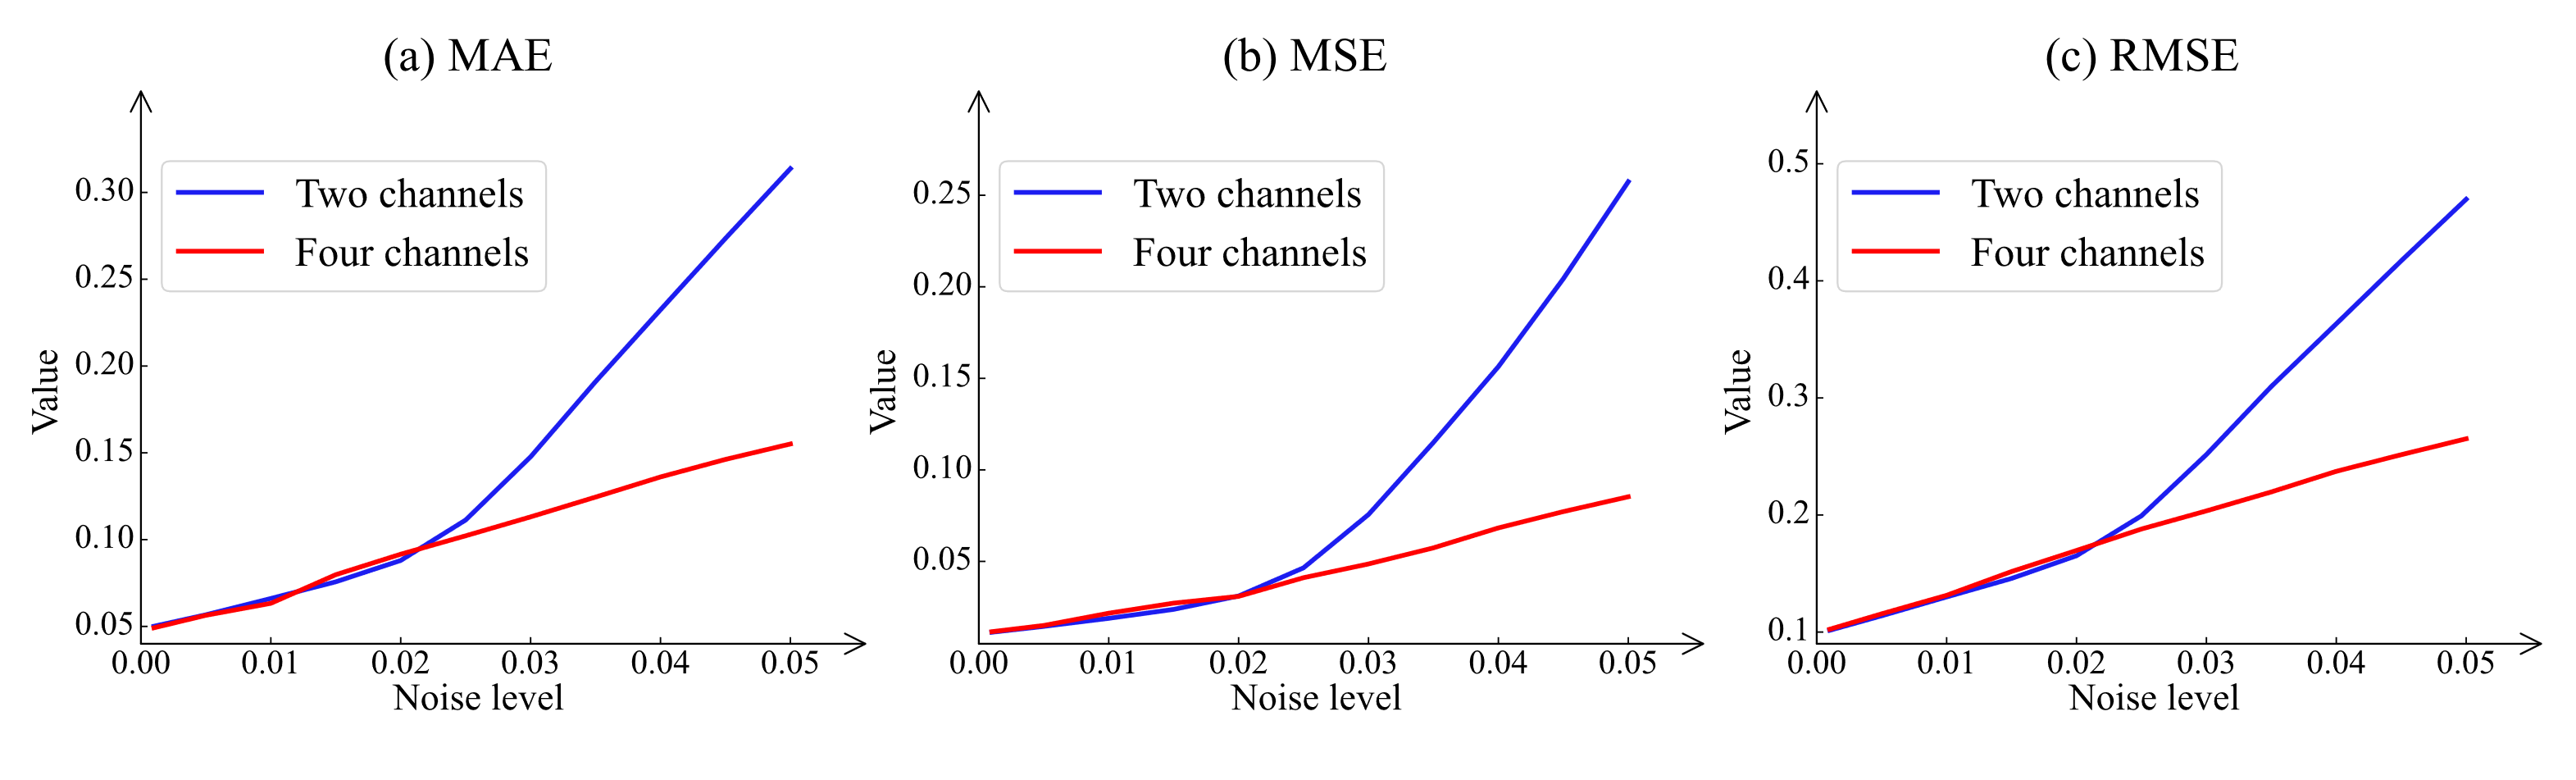 Figure 7. Quantitative comparison of four-channel and two-channel system at different noise levels.